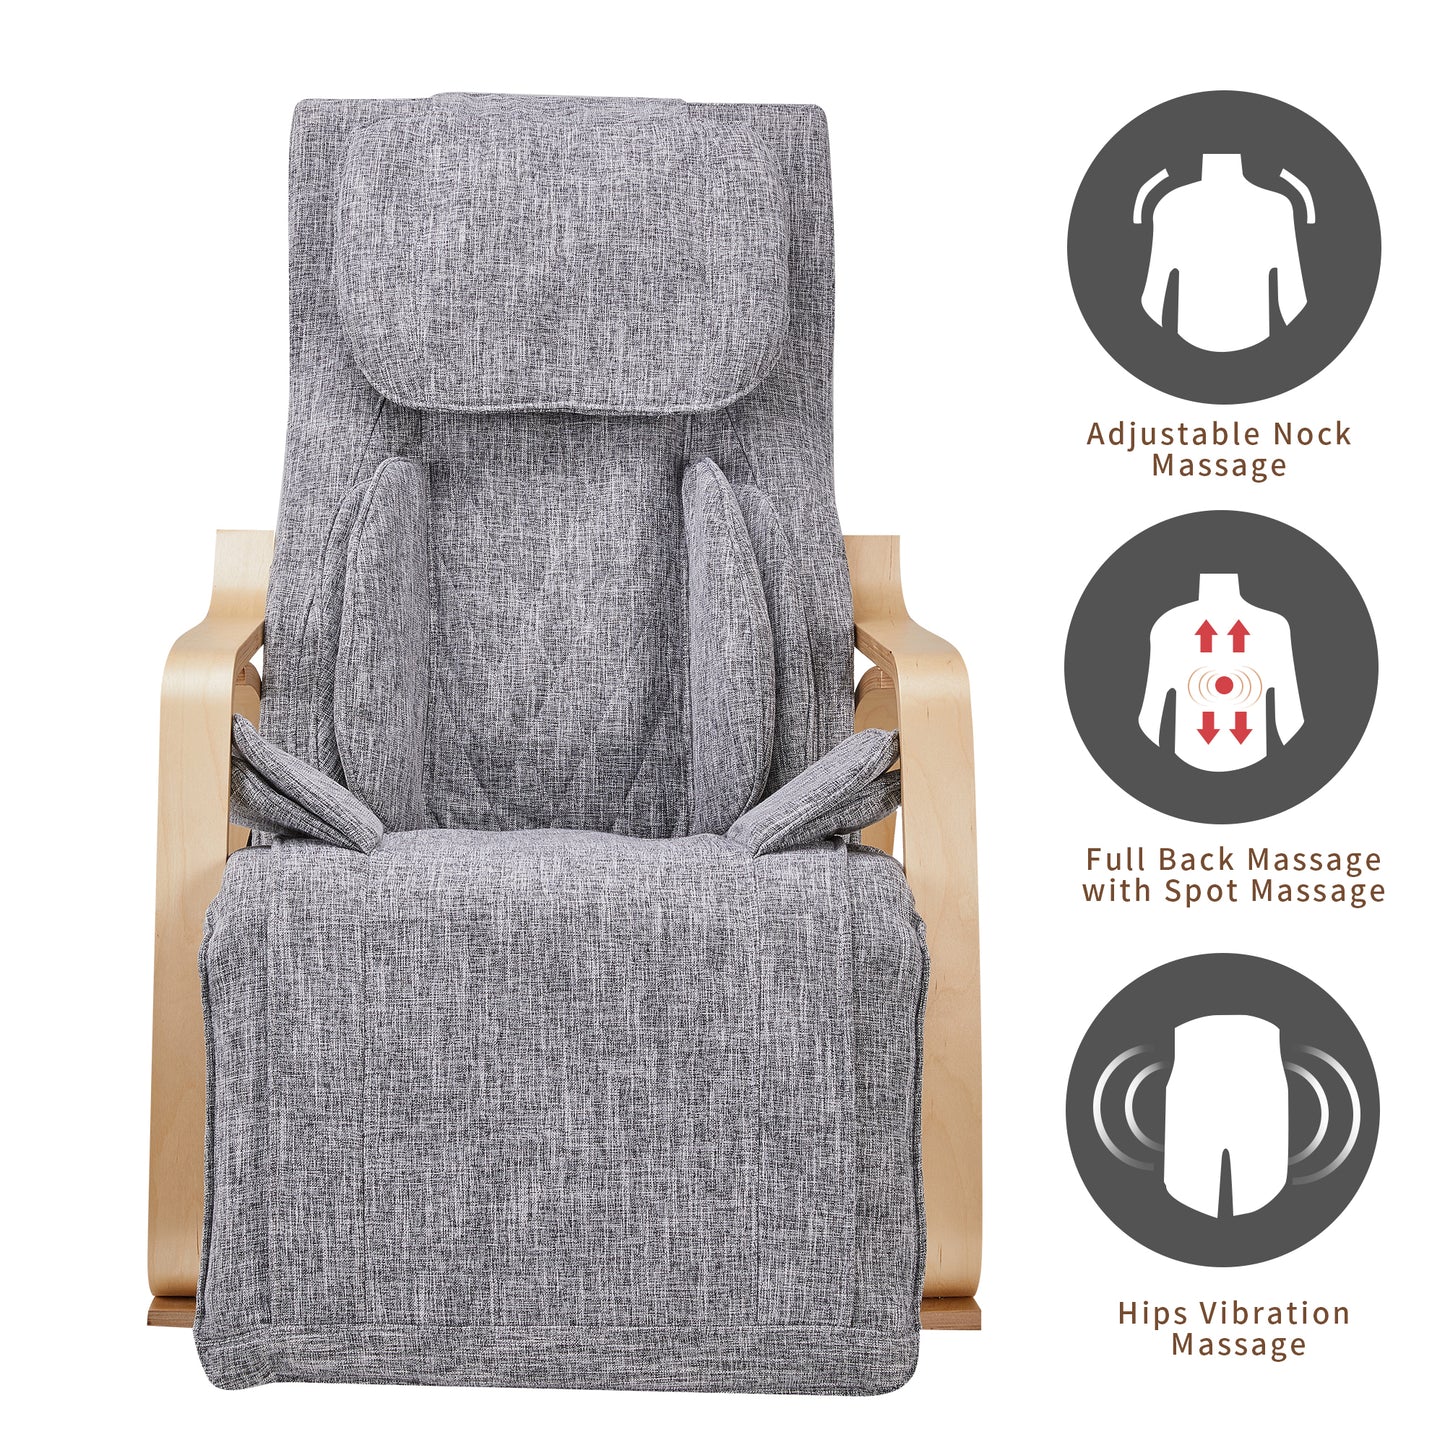 Full massage function-Air pressure-Comfortable Relax Rocking Chair, Lounge Chair Relax Chair with Cotton Fabric Cushion ， White and gray